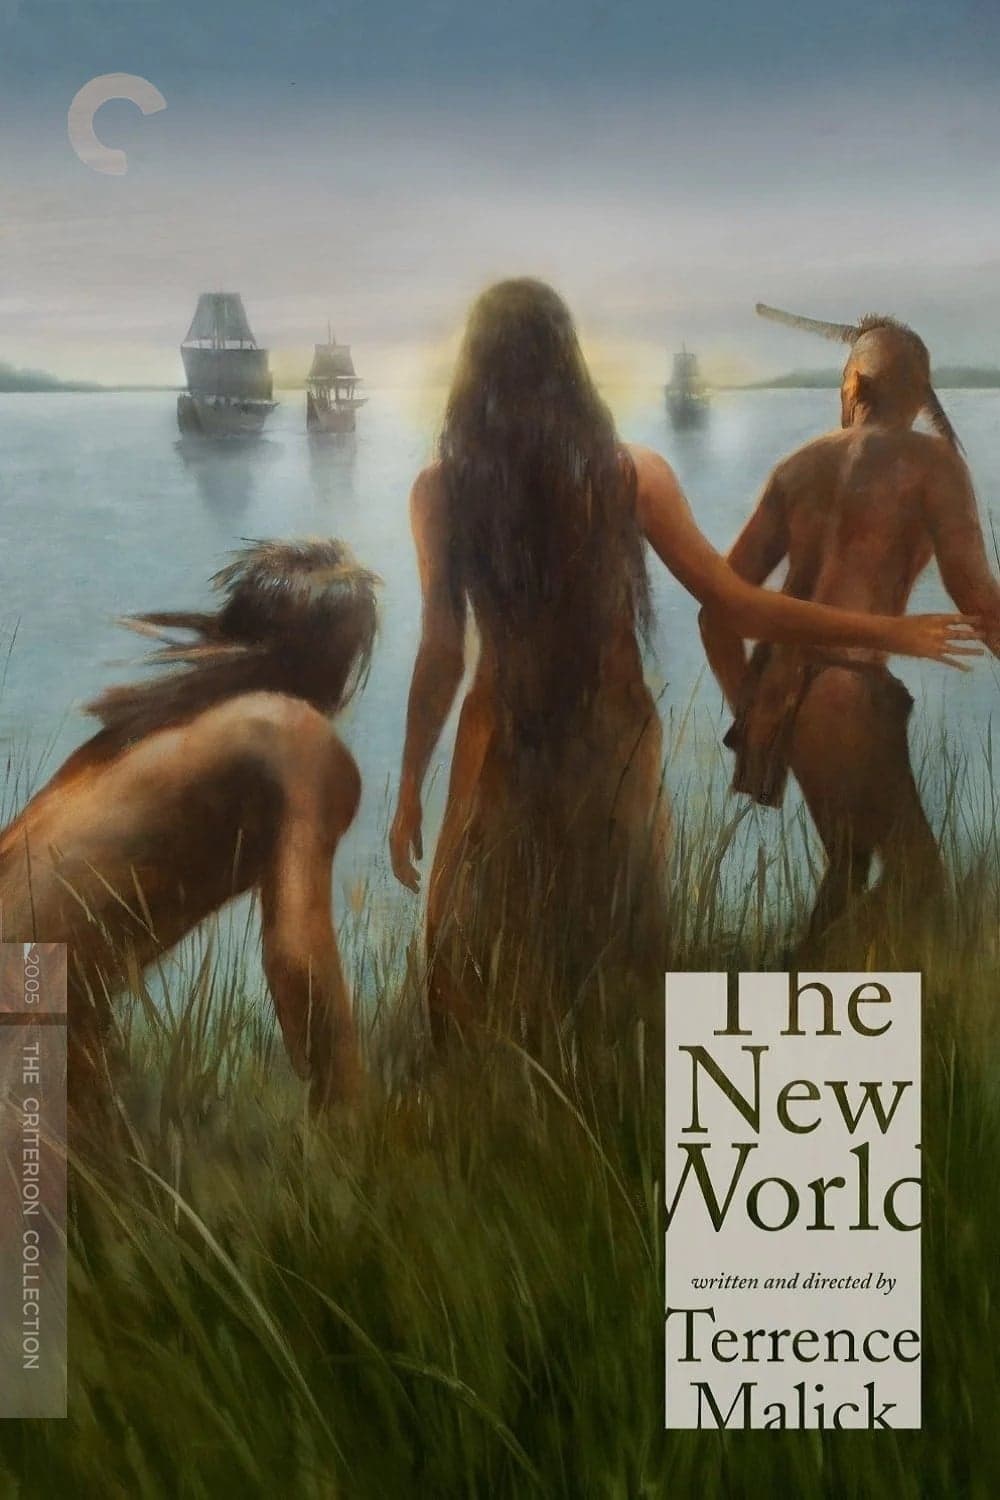 The New World POSTER